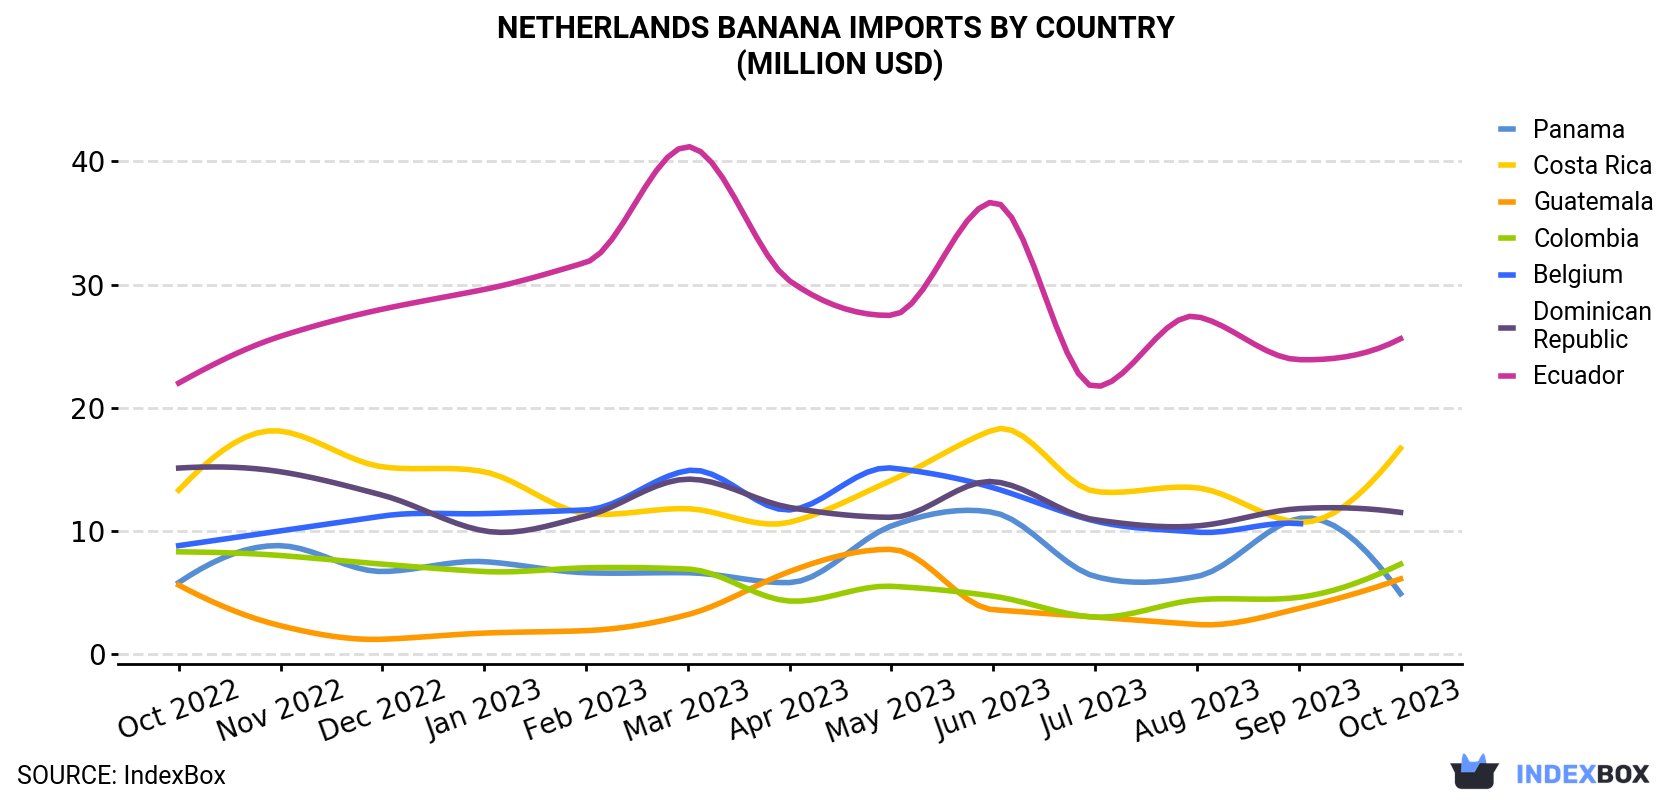 Netherlands Banana Imports By Country (Million USD)